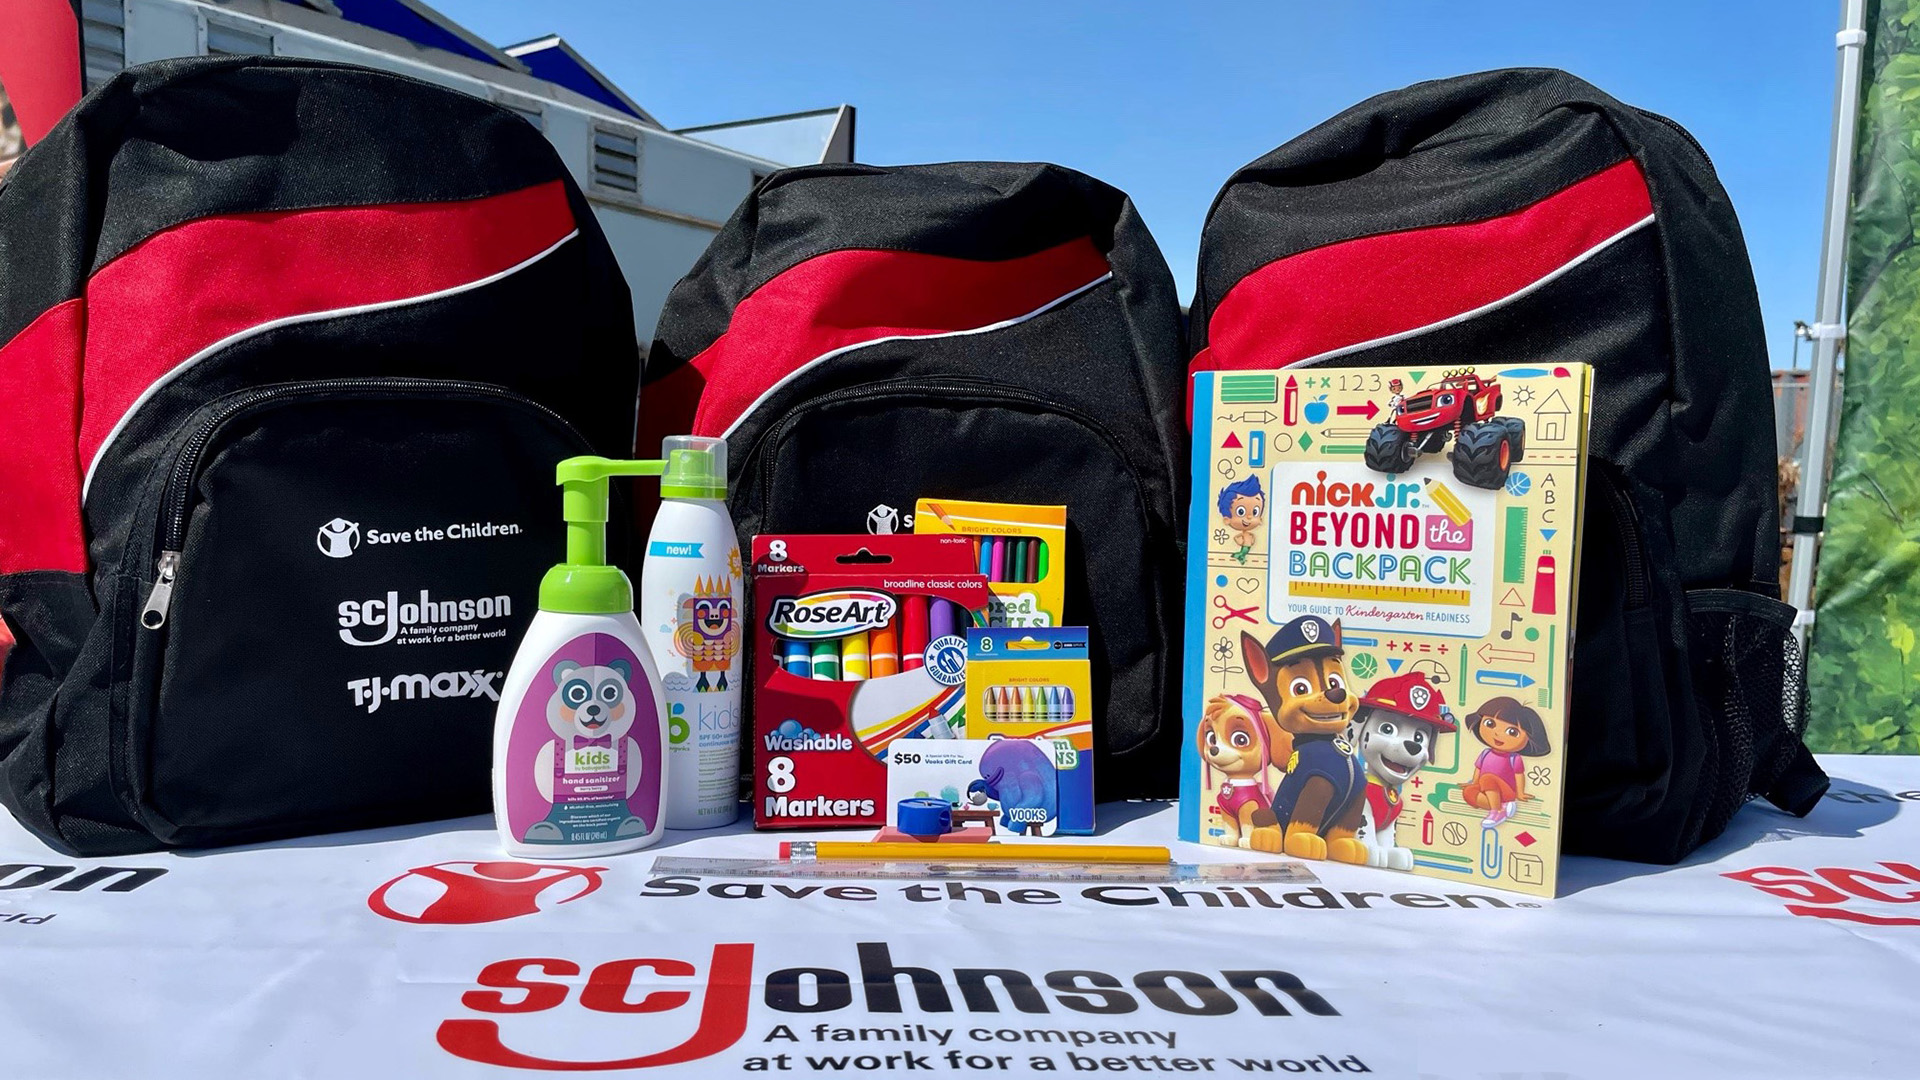 SC Johnson sponsored backpack and material on table